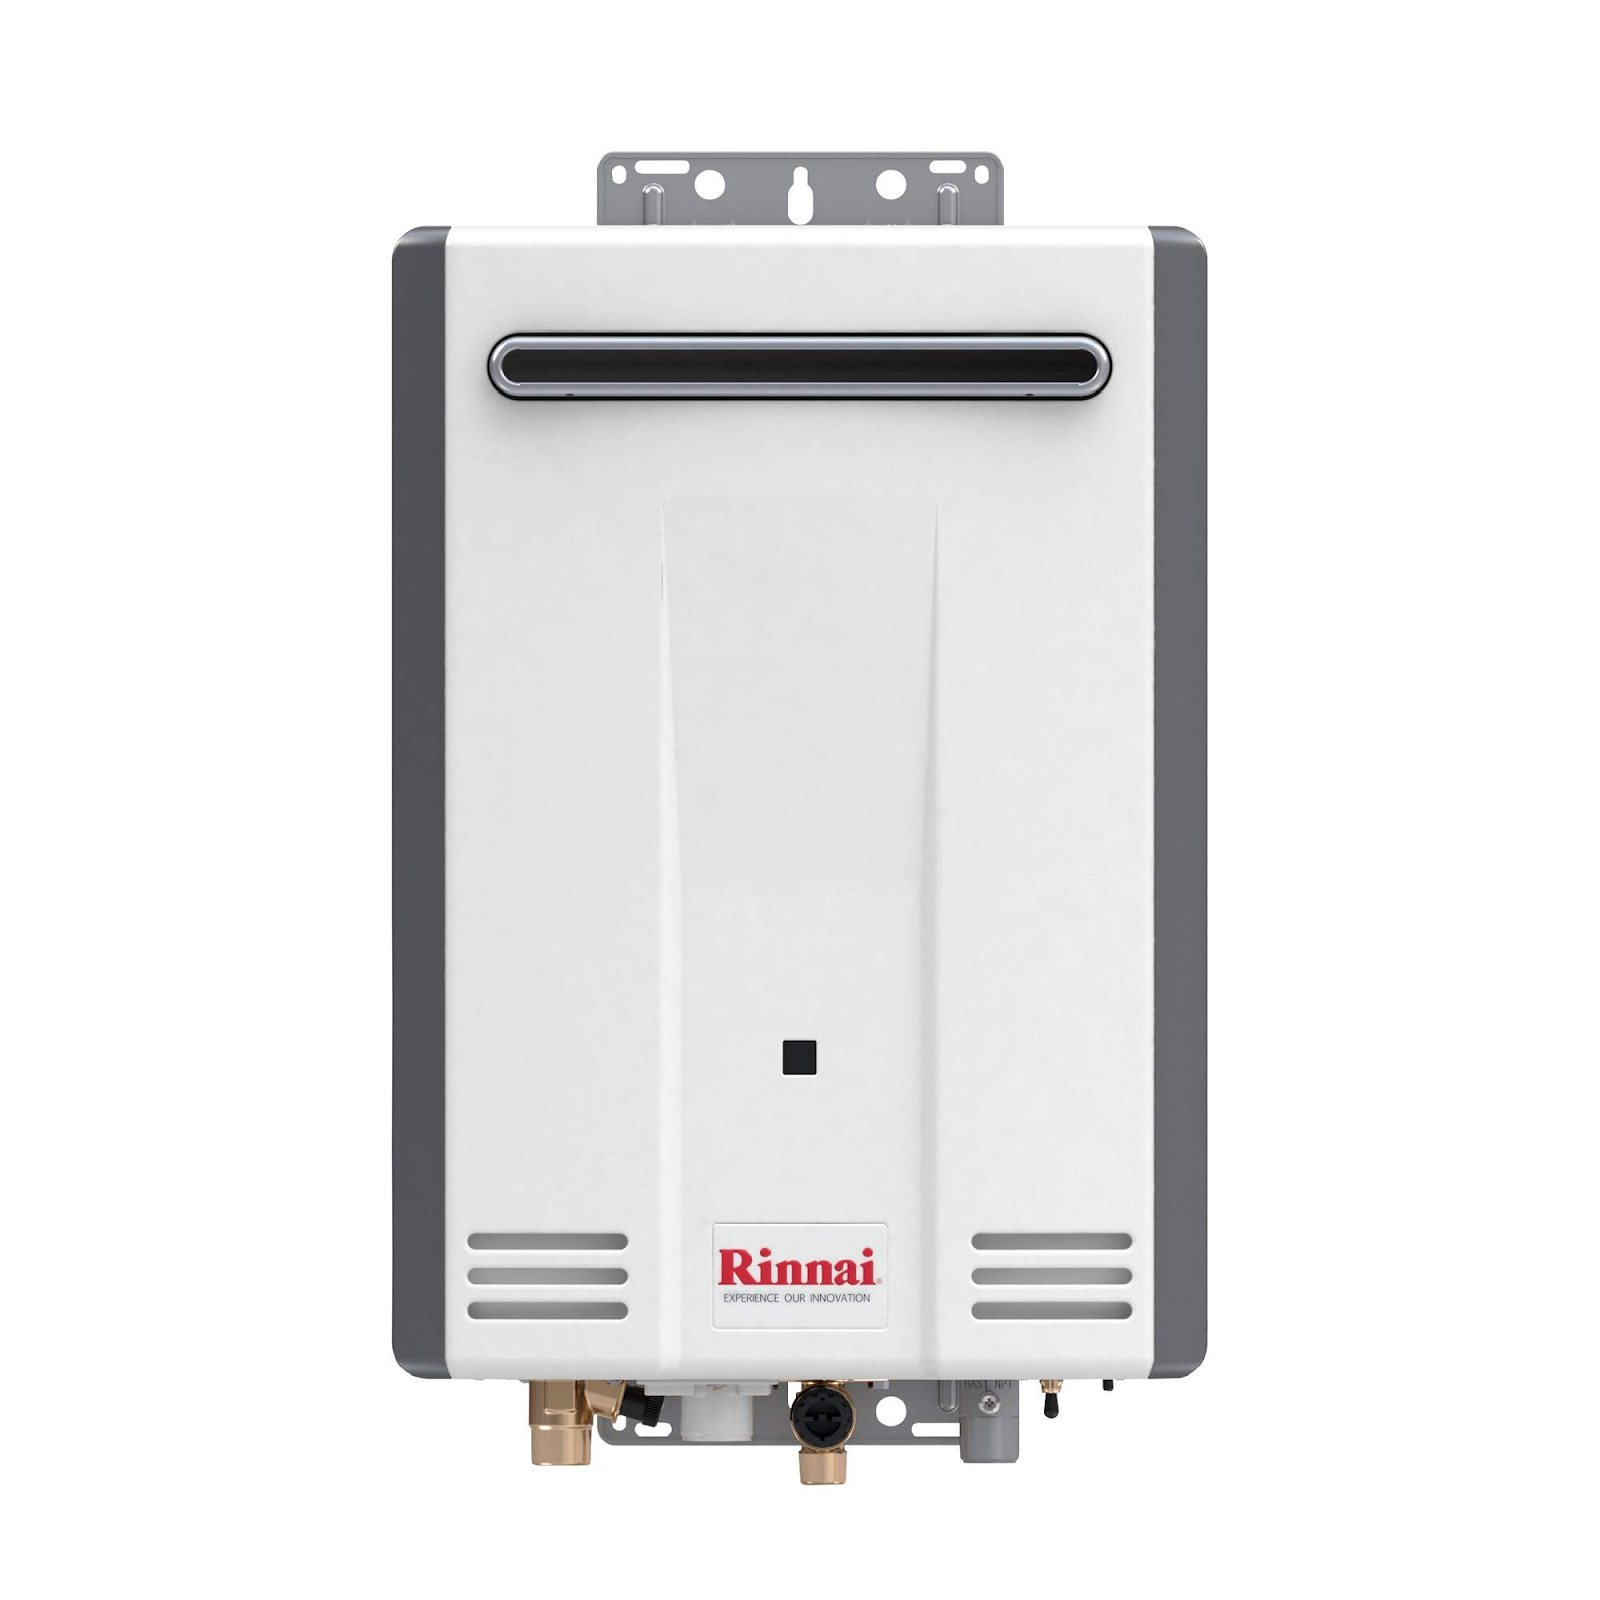 Tankless Water Heaters Getting the Most Out of Your System